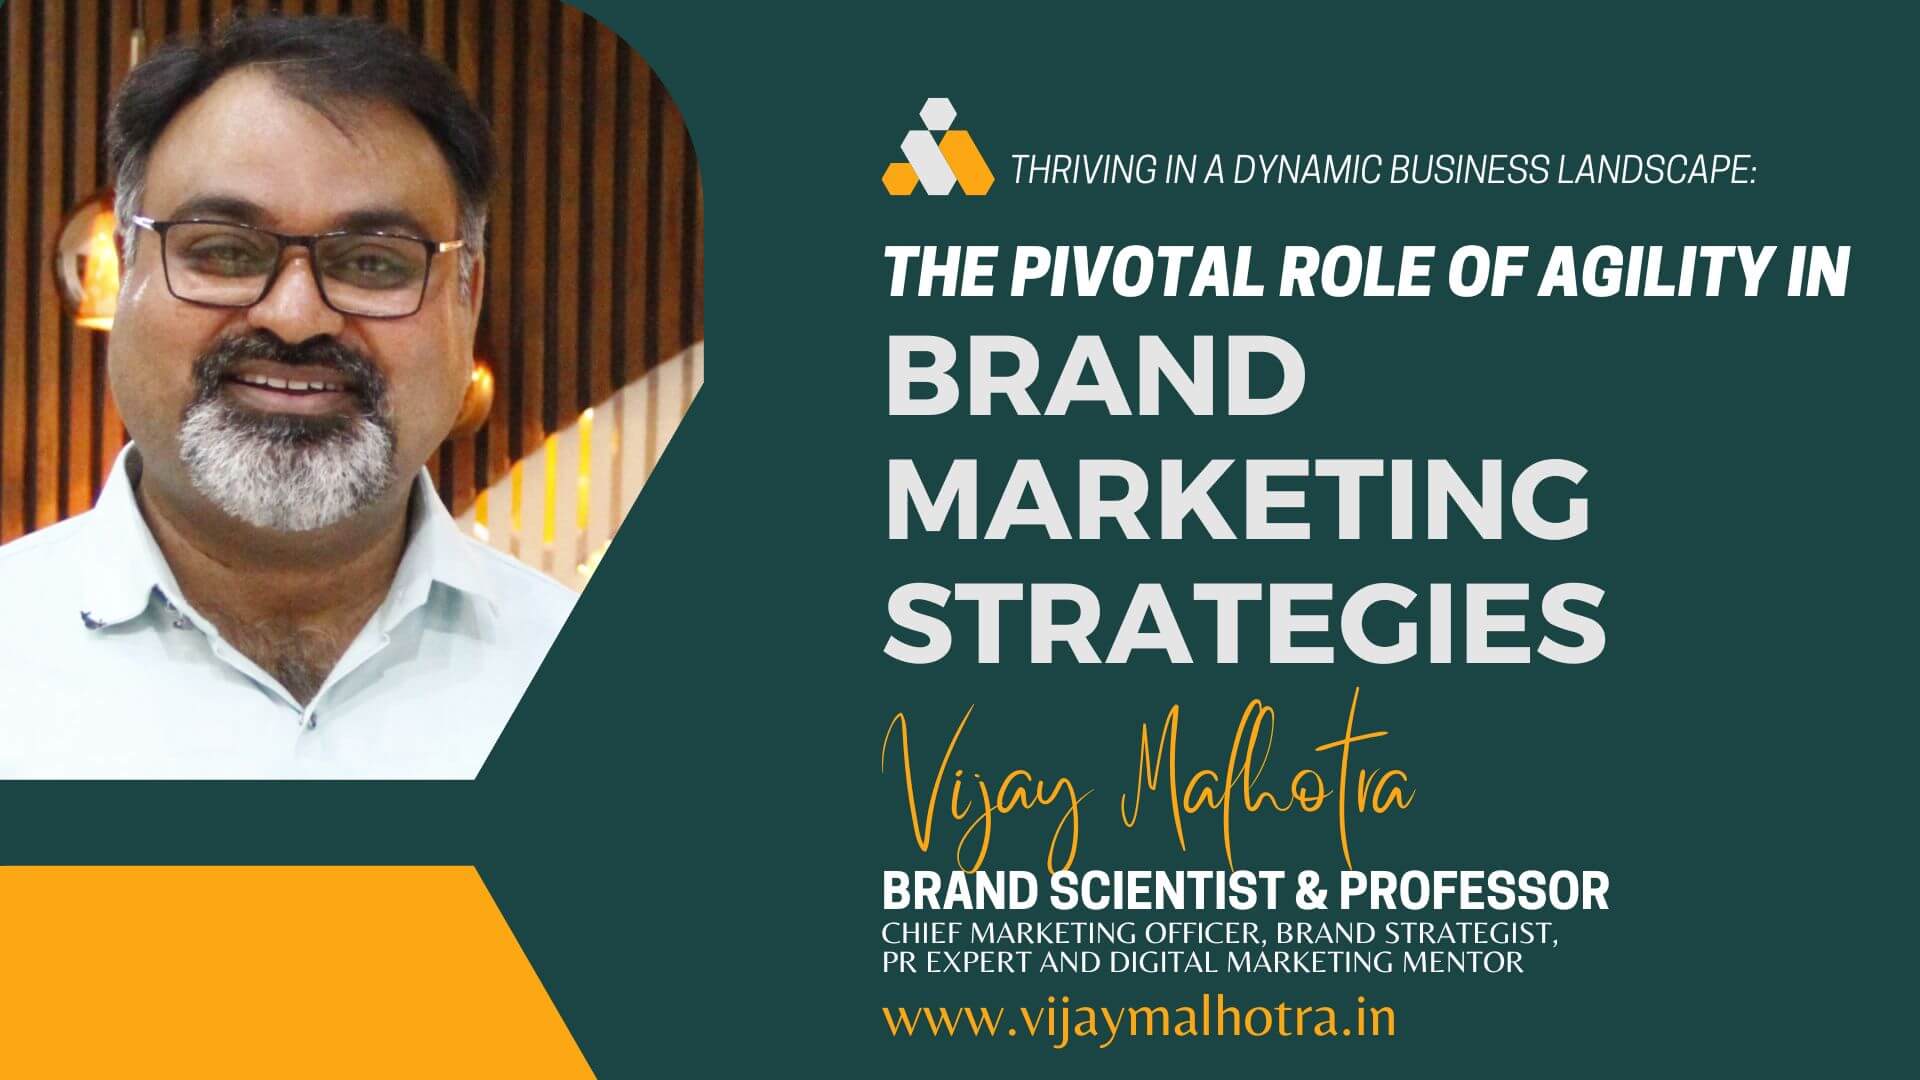 Vijay Malhotra discussing the pivotal role of agility in brand marketing strategies in today's dynamic business landscape